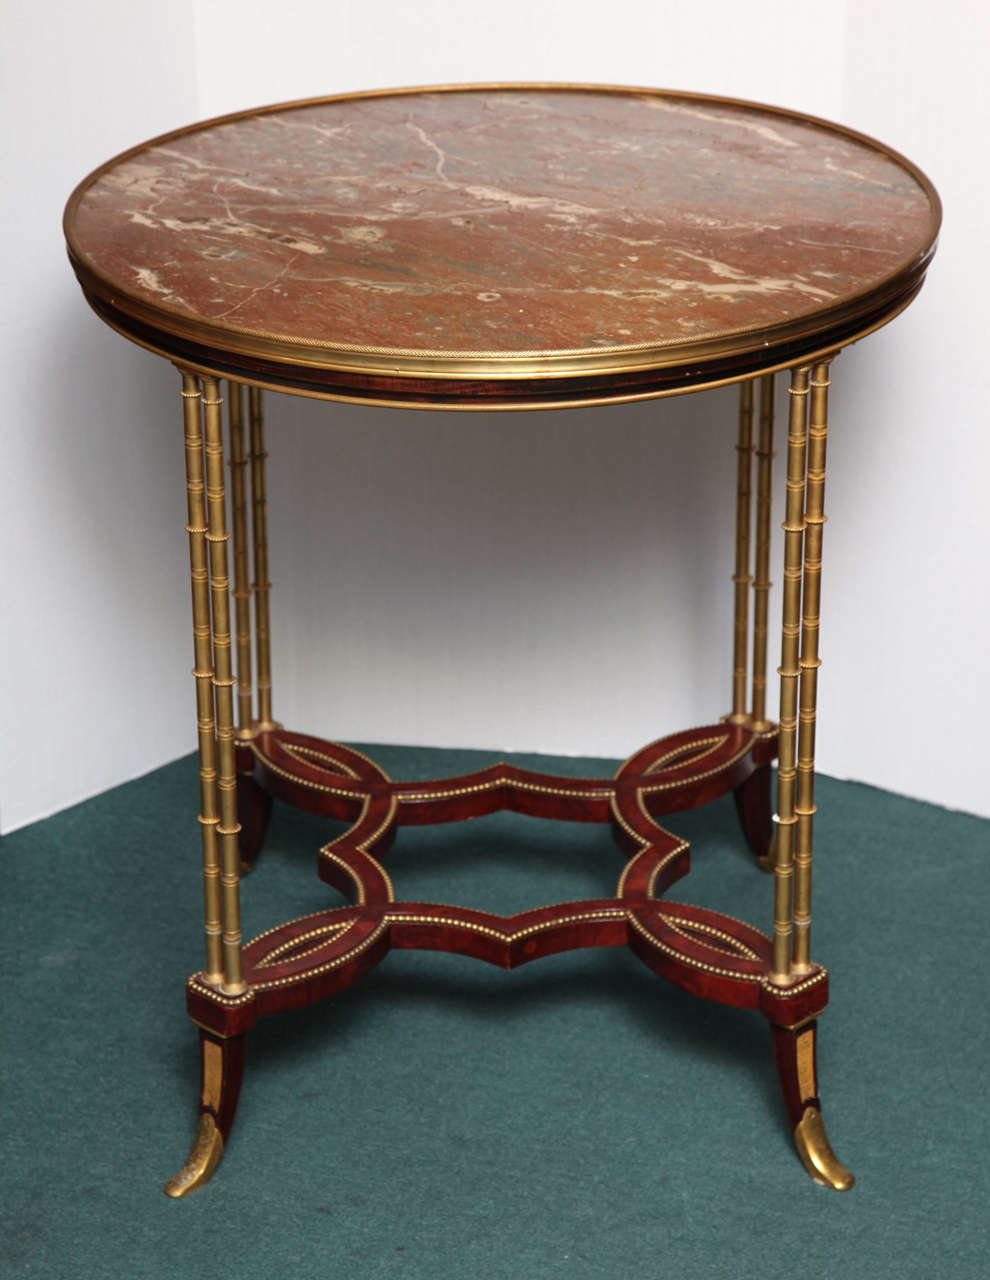 A very fine round marble top Louis XVI style gueridon with bronze bamboo legs
Stock Number: F96.